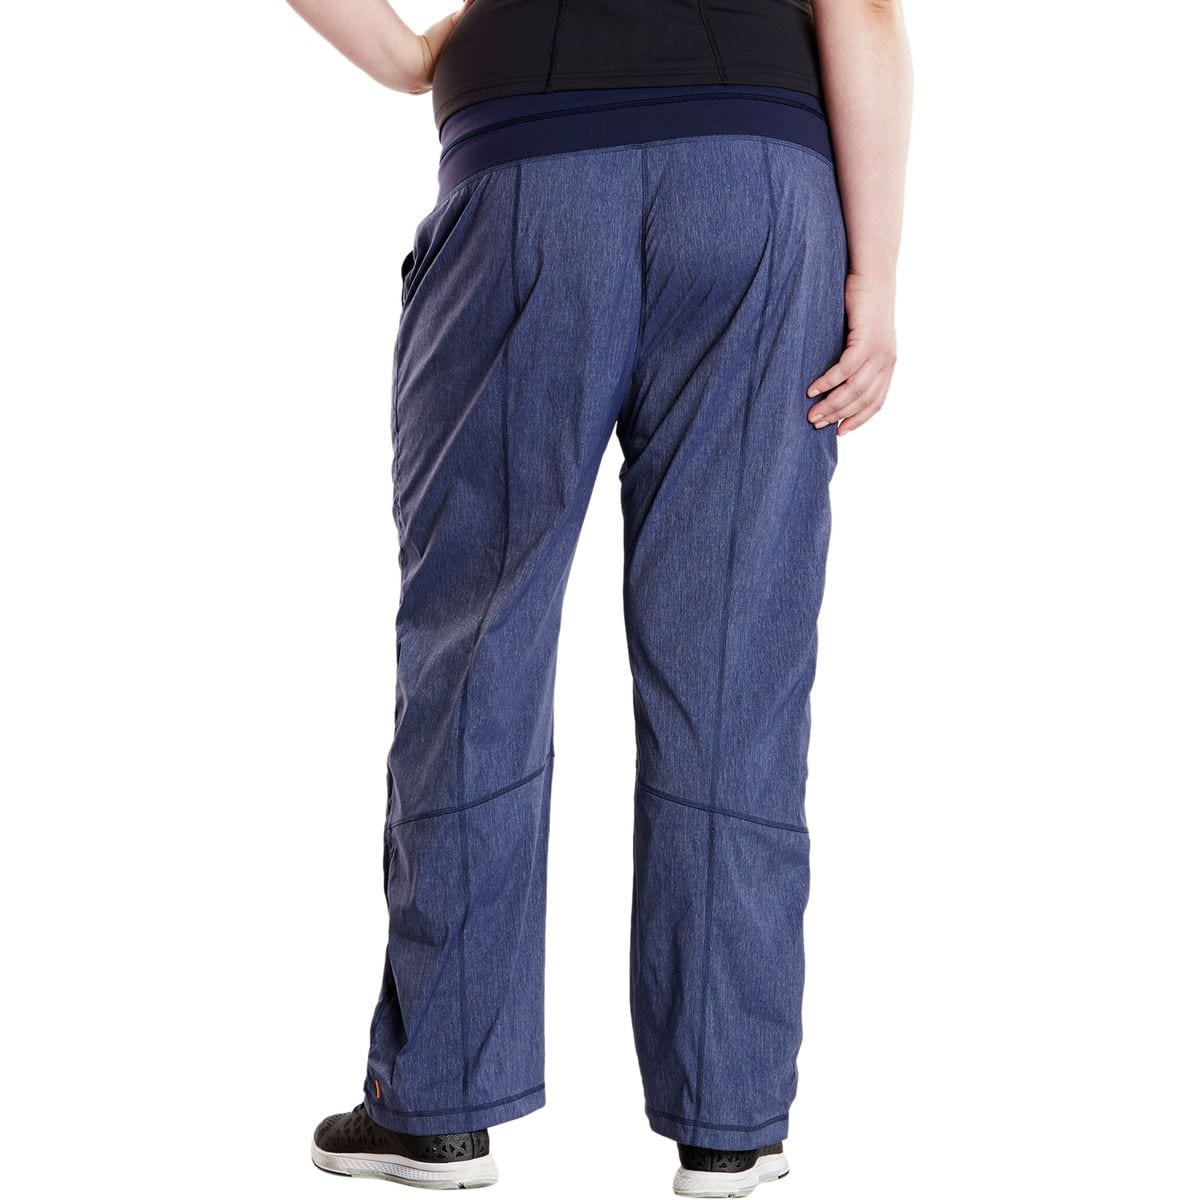 Lucy Get Going Straight Leg Pant - Women's - Clothing